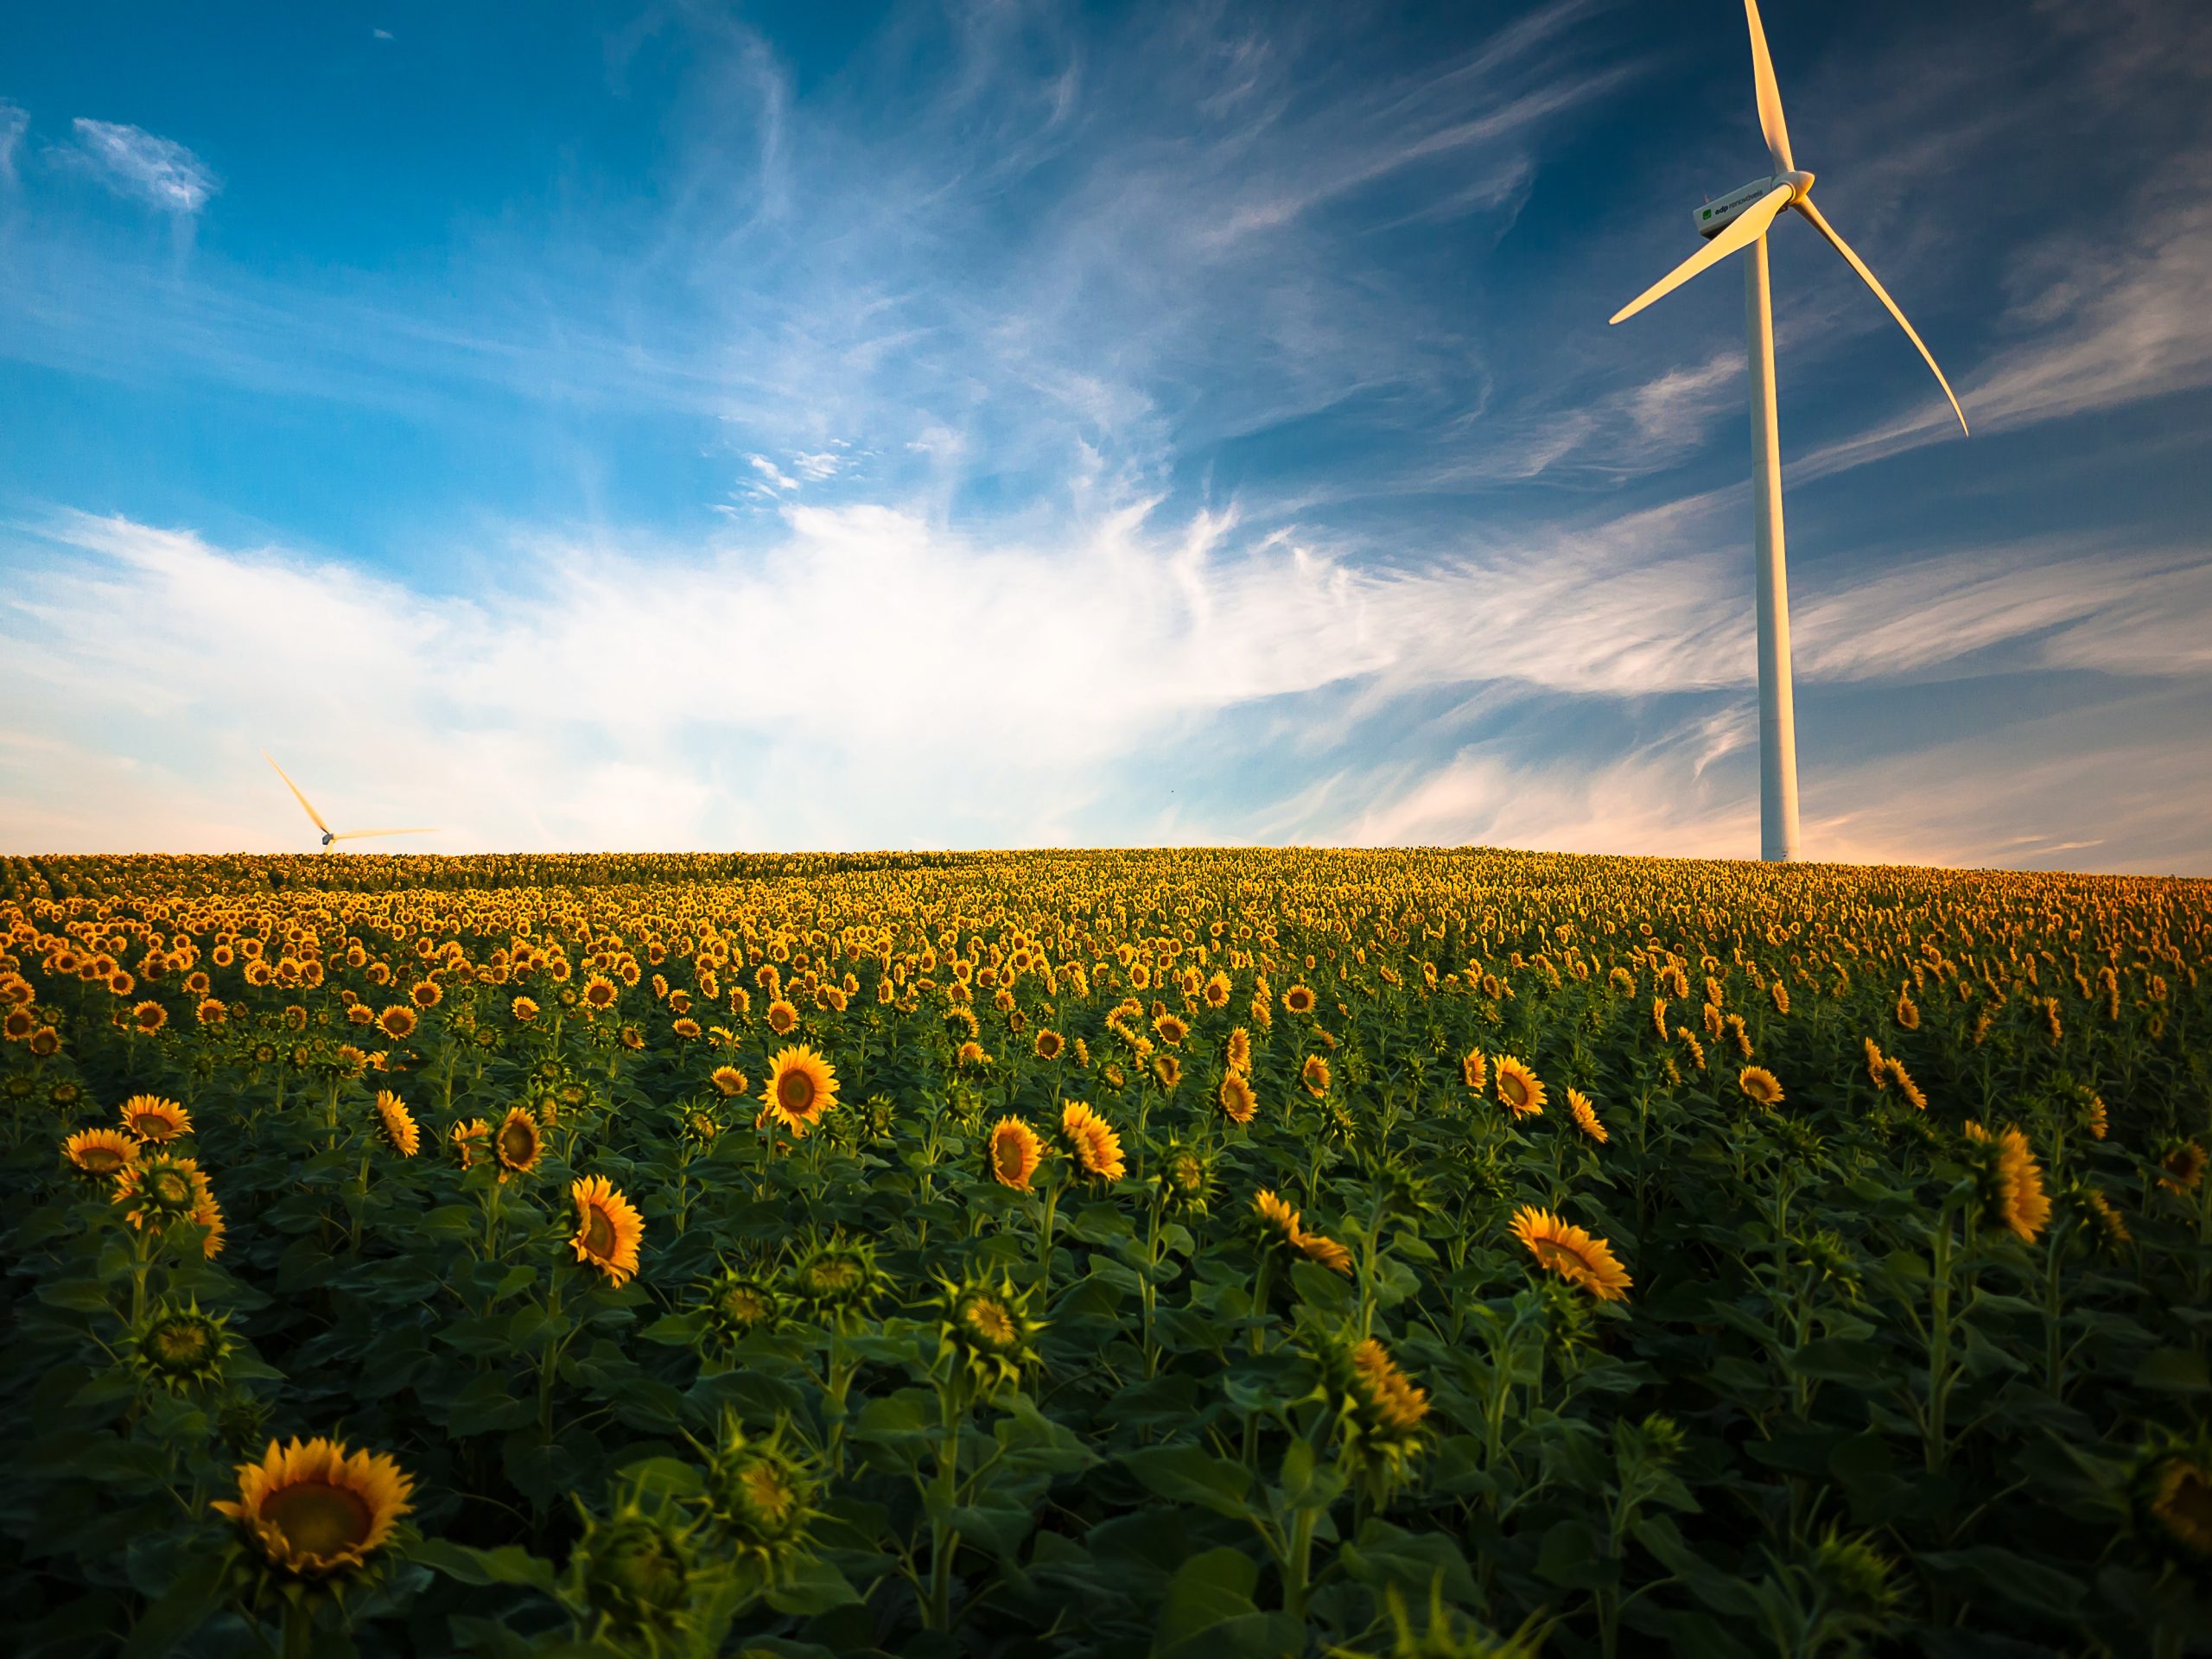 A wind turbine stands above a field of sunflowers and below a bright blue sky